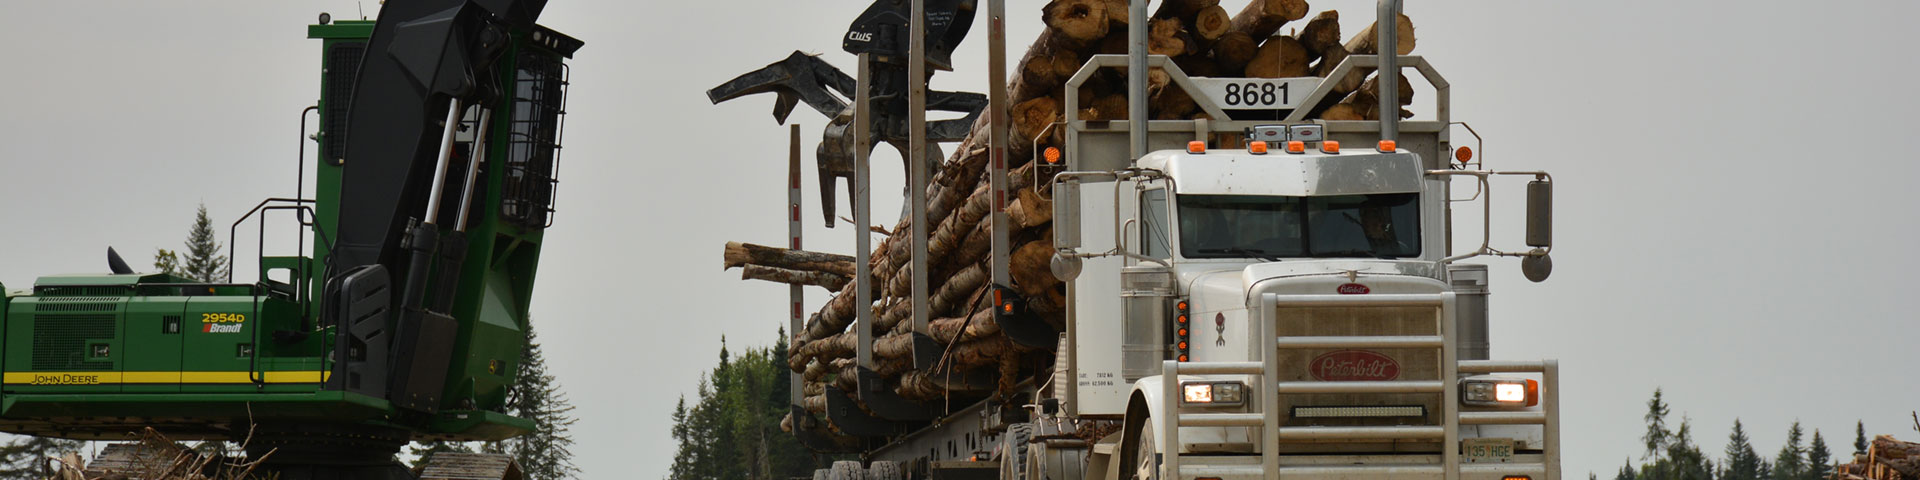 logging truck being loaded